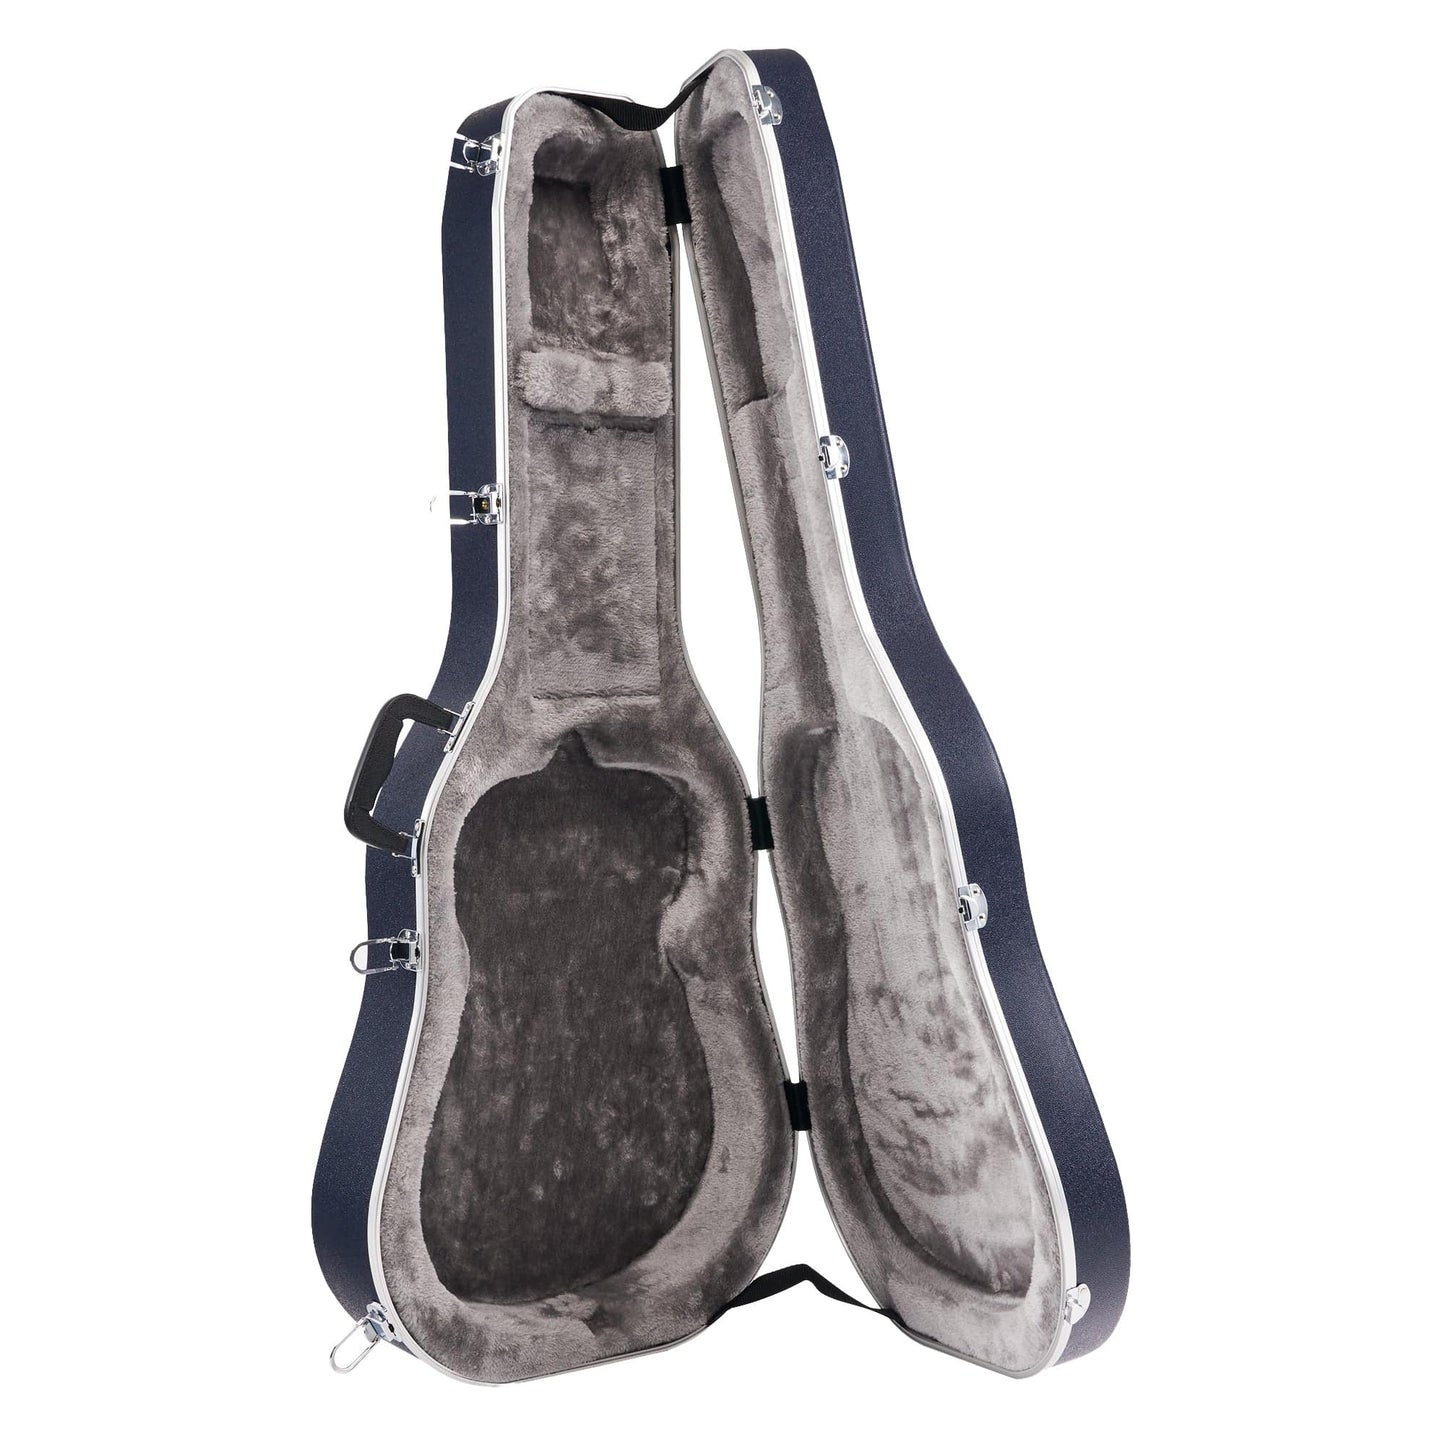 Martin 000-14F 630 Style 000 Case Navy Blue with Silver Interior Accessories / Cases and Gig Bags / Guitar Cases